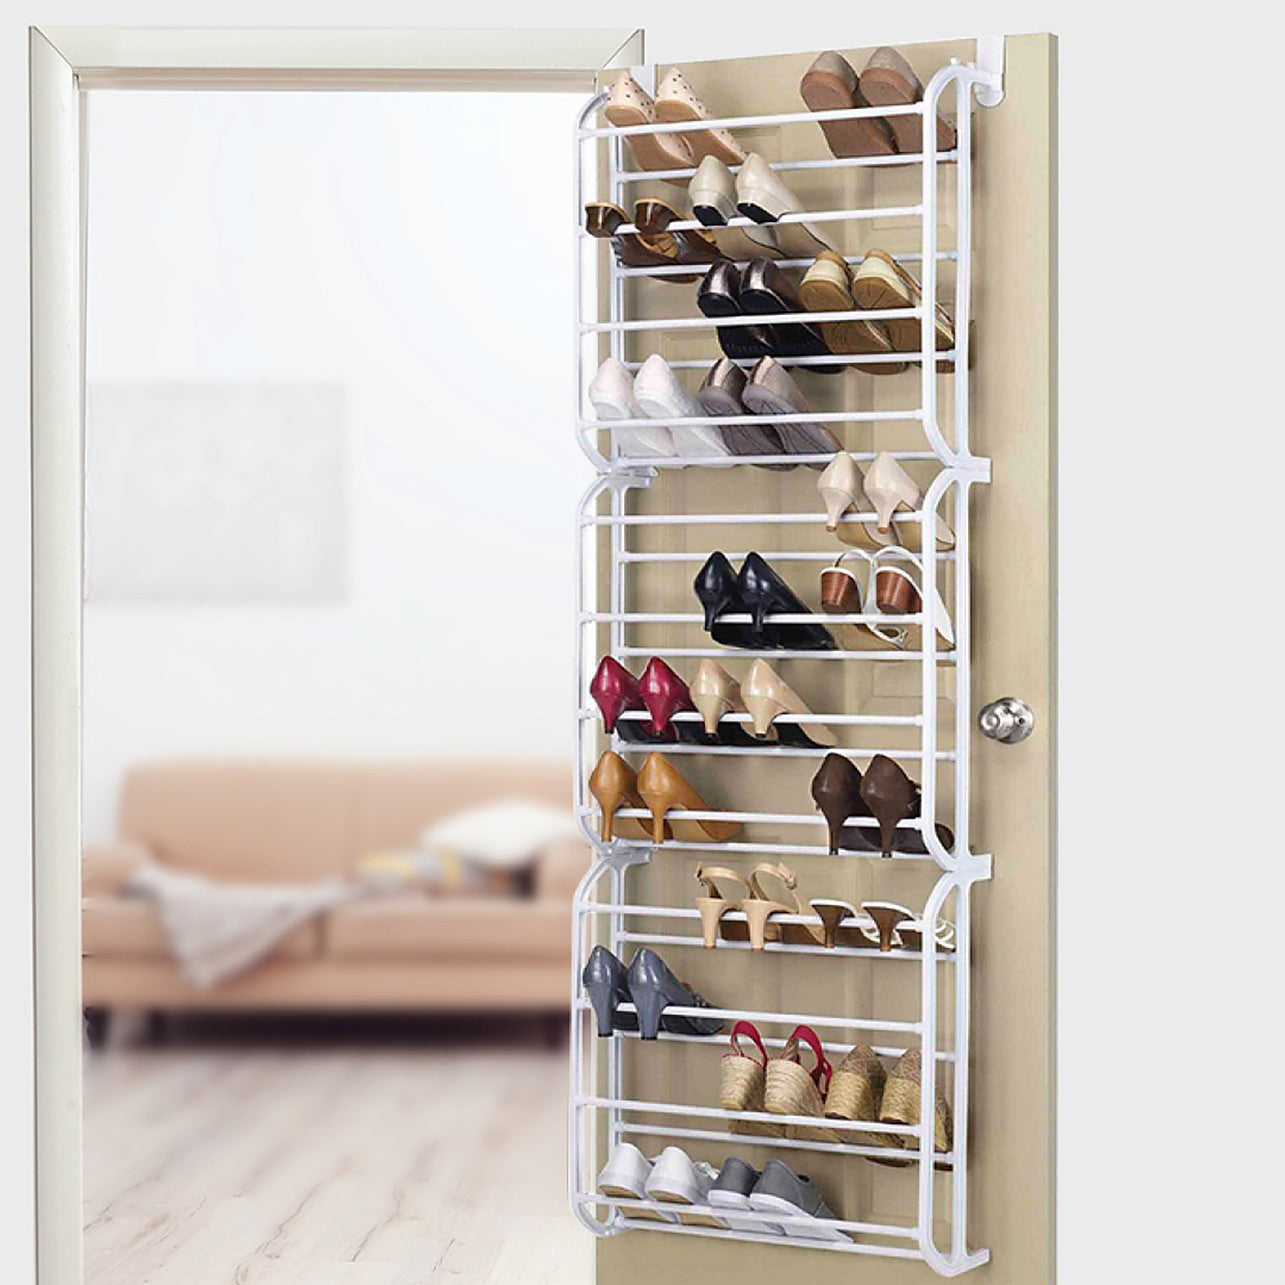 The Container Store Hanging Shoe Organizer | The Container Store